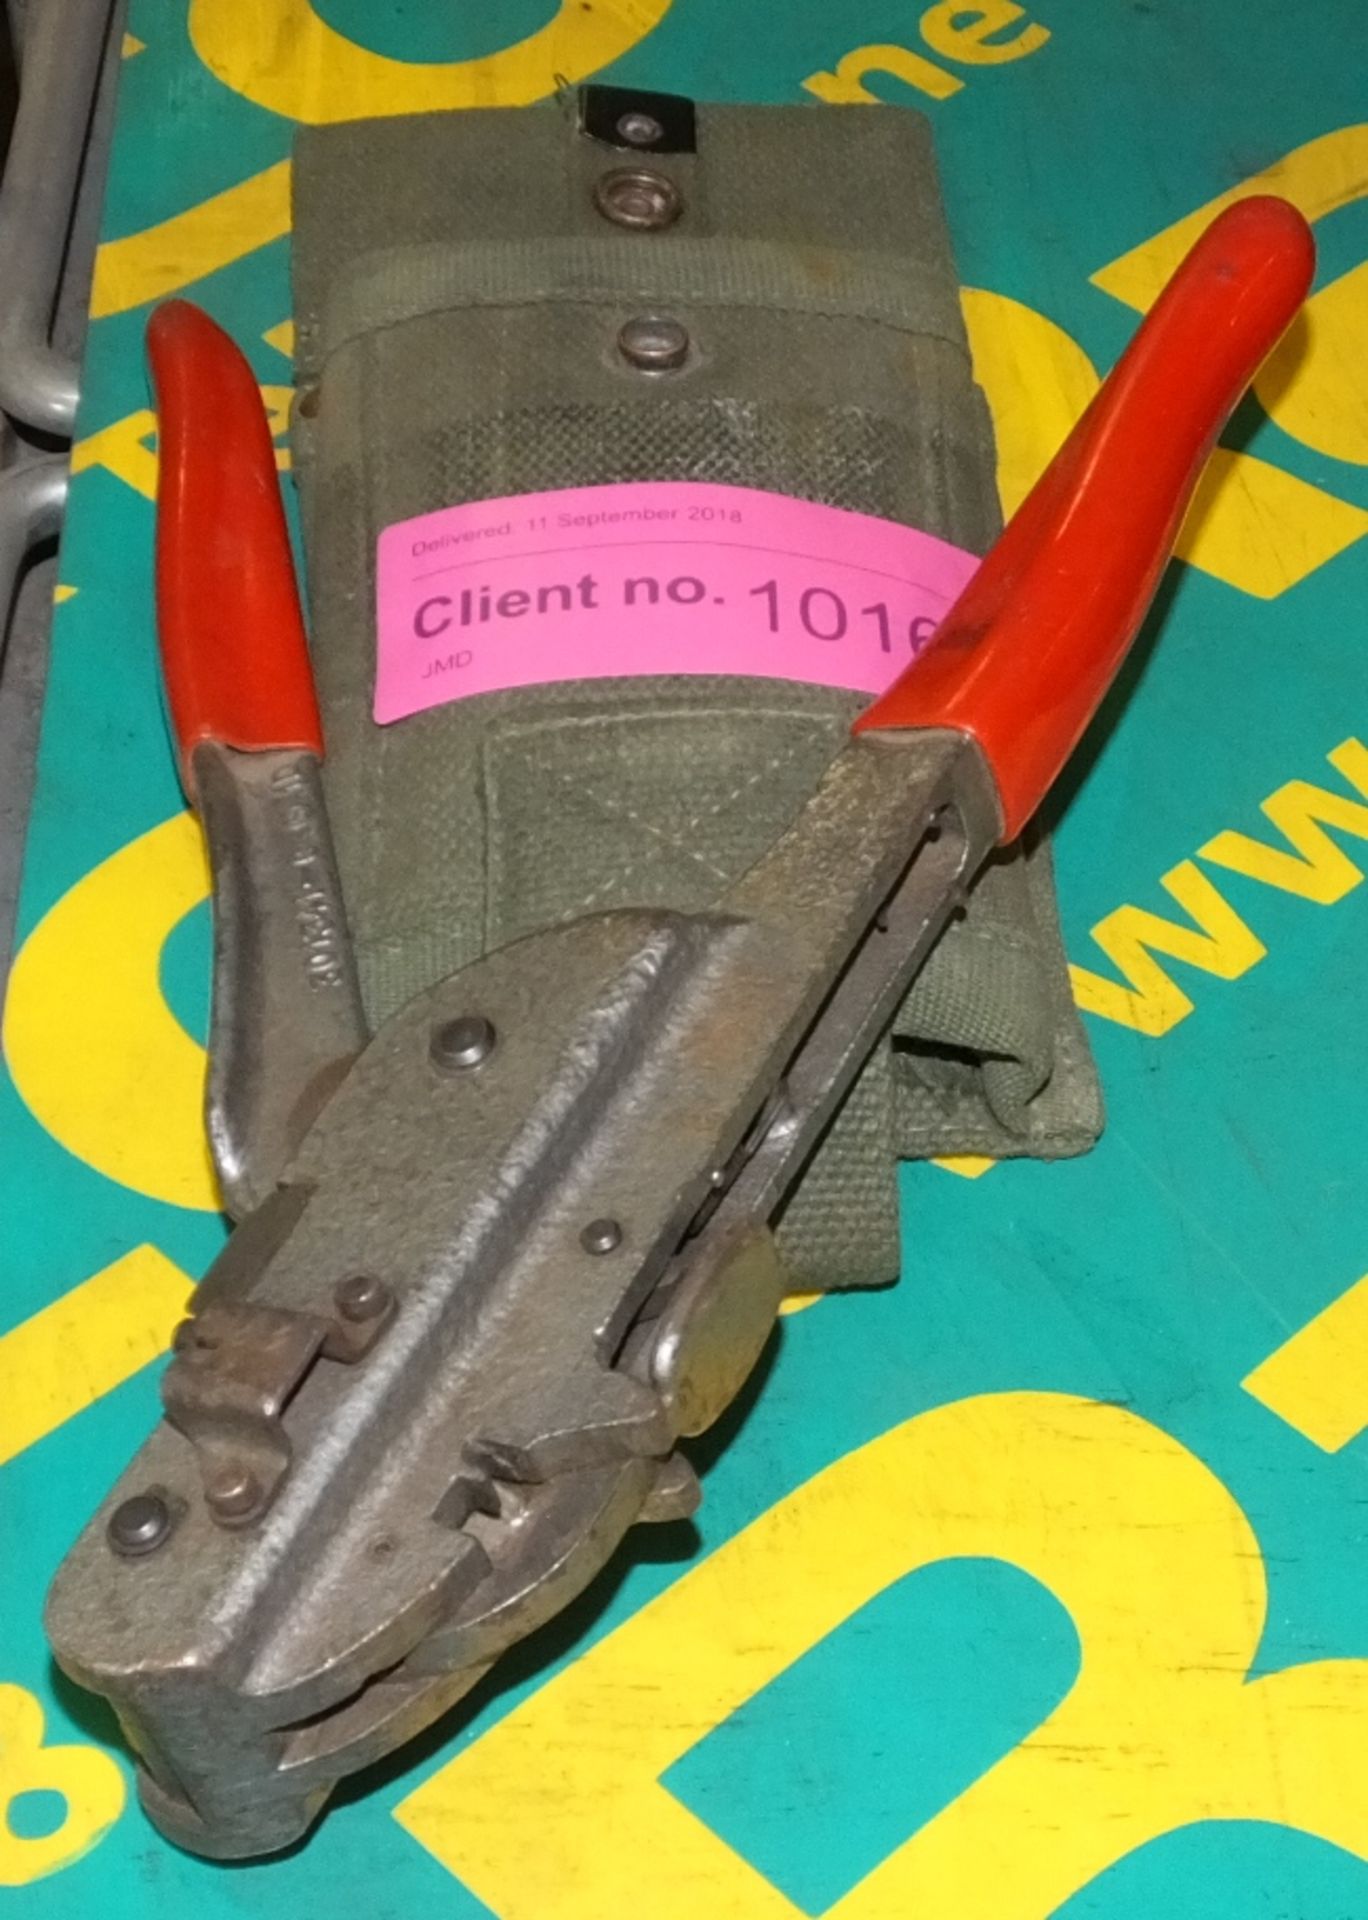 Heavy duty crimping pliers with carry pouch